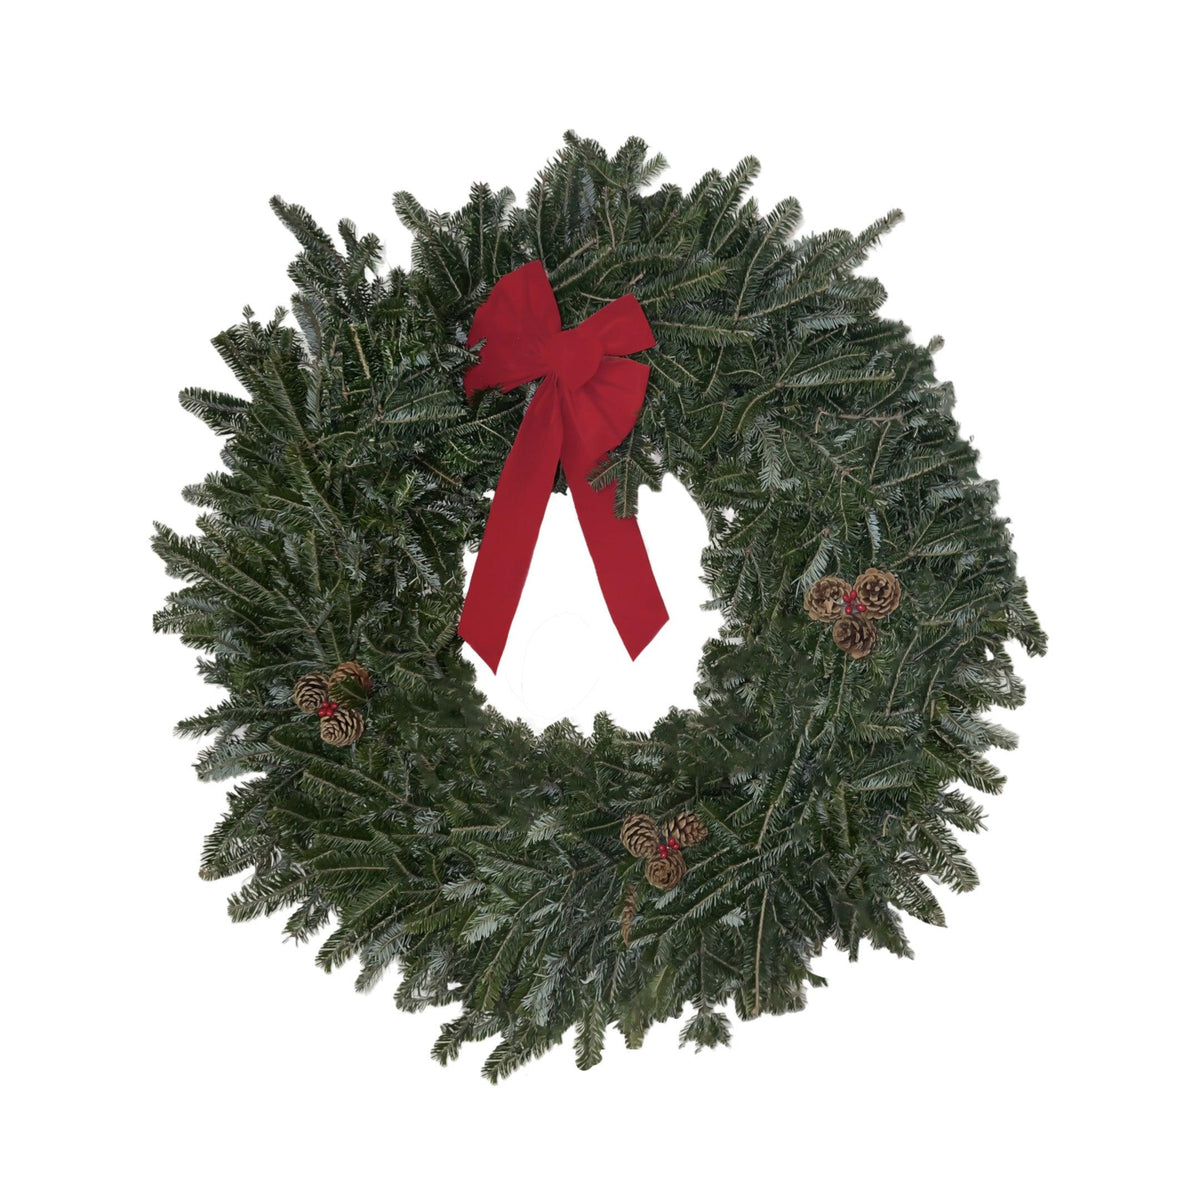 Handmade Fraser Wreath w/ Ribbon & Cones - City Tree Delivery - Chicagoland Christmas Tree Delivery